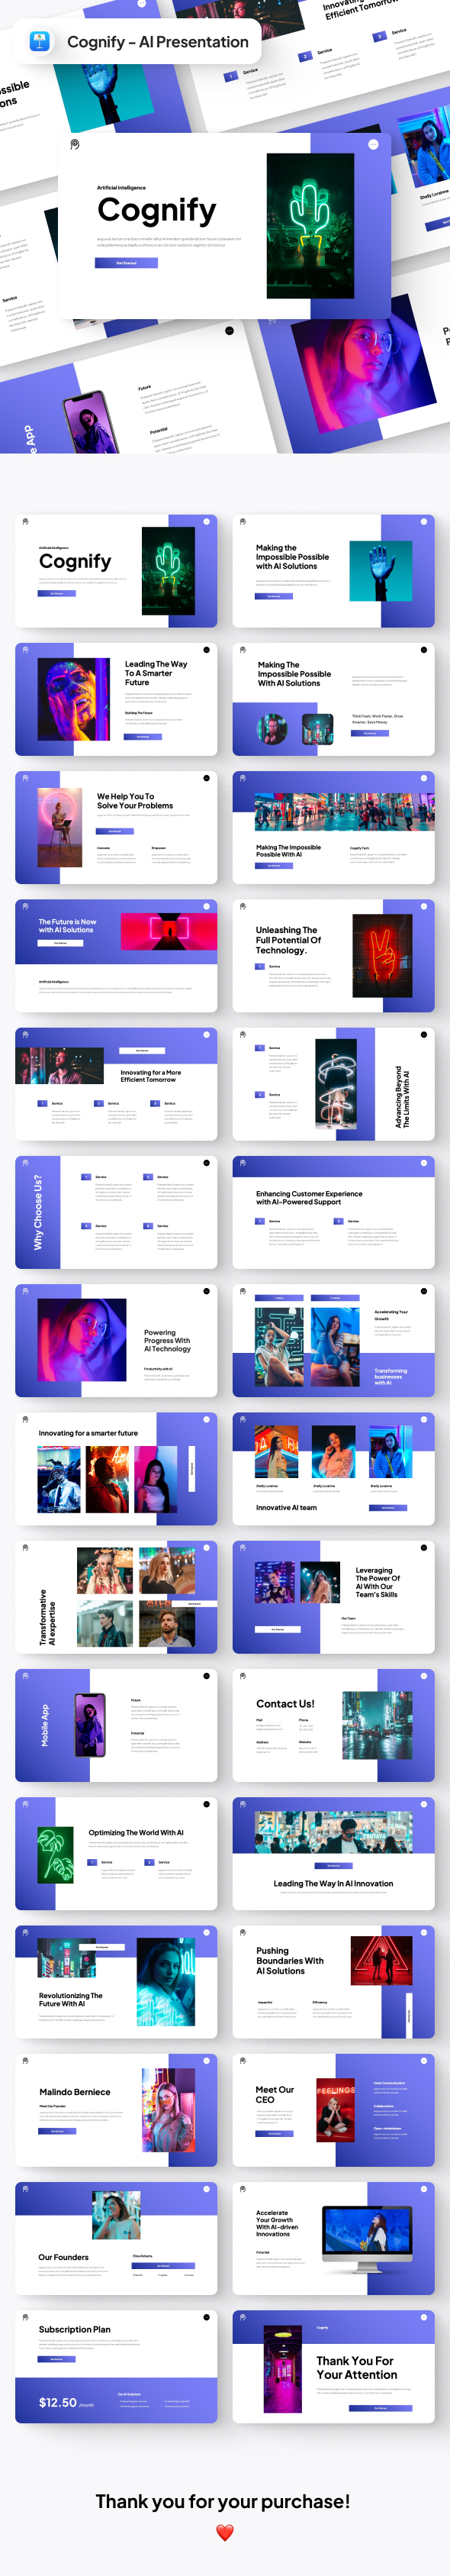 Cognify - Artificial Intelligence Keynote Presentation Template